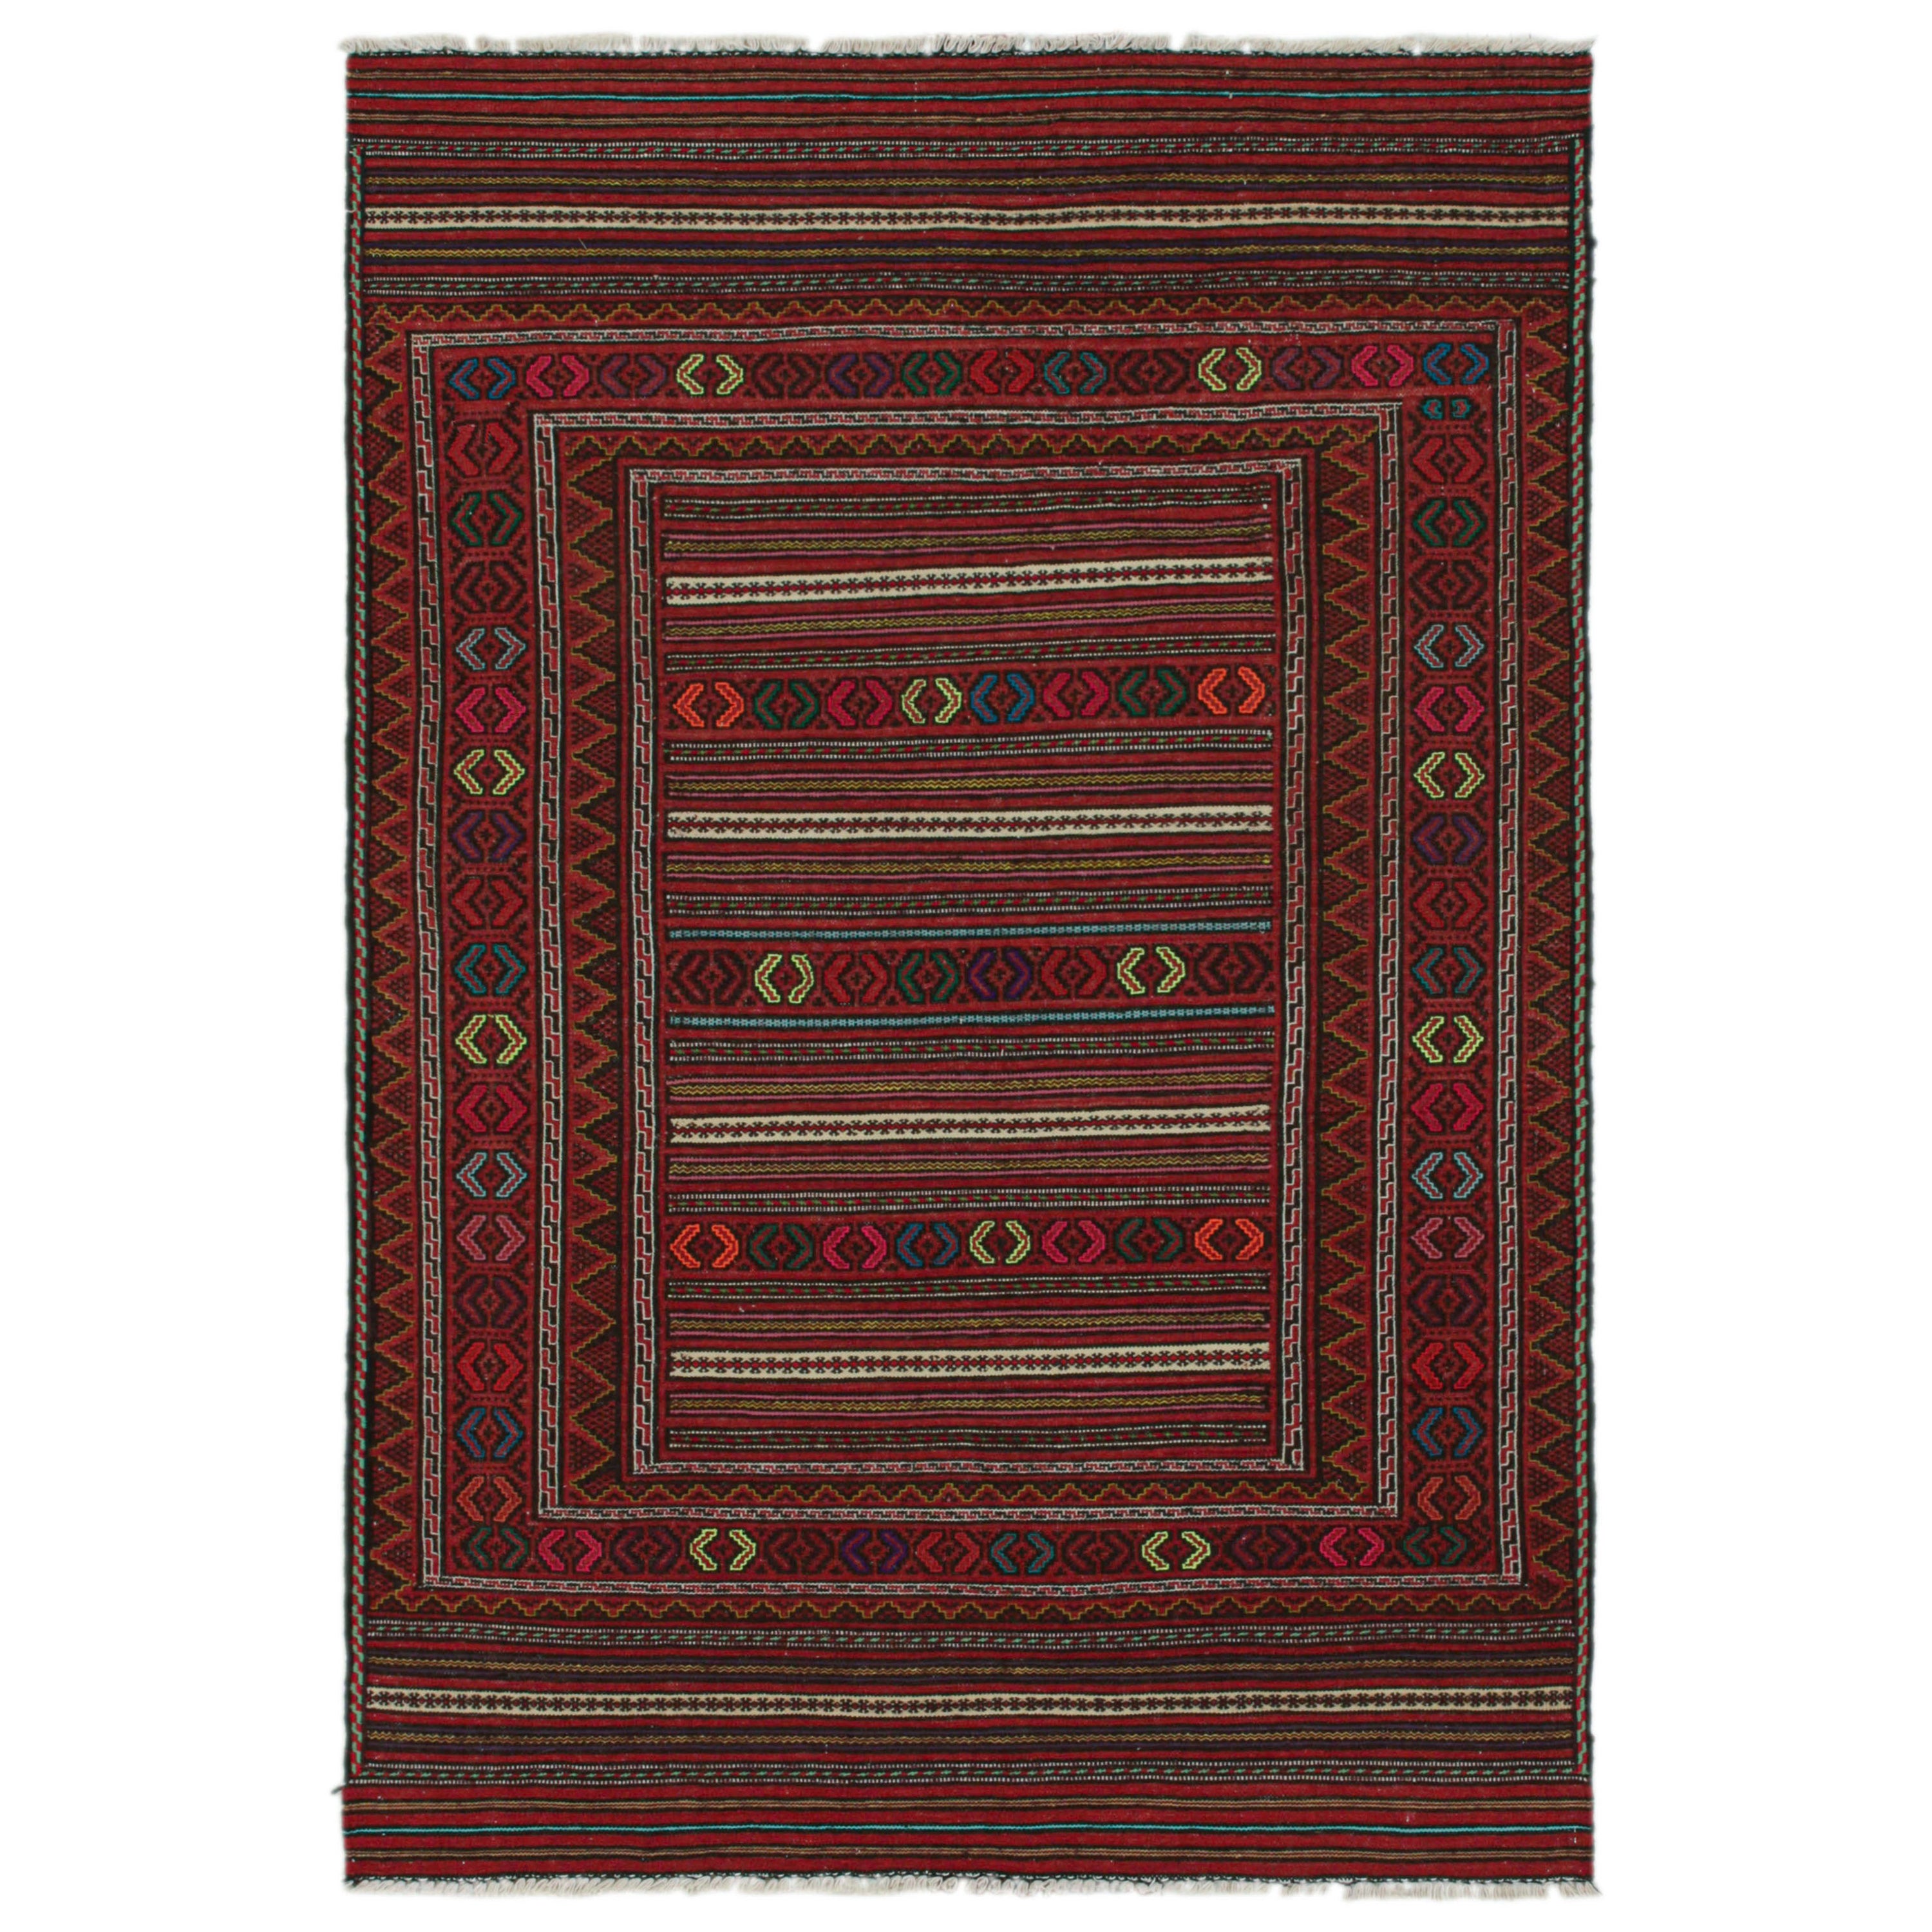 Vintage Baluch Kilim Rug in Red with Stripes and Tribal Motifs, from Rug & Kilim